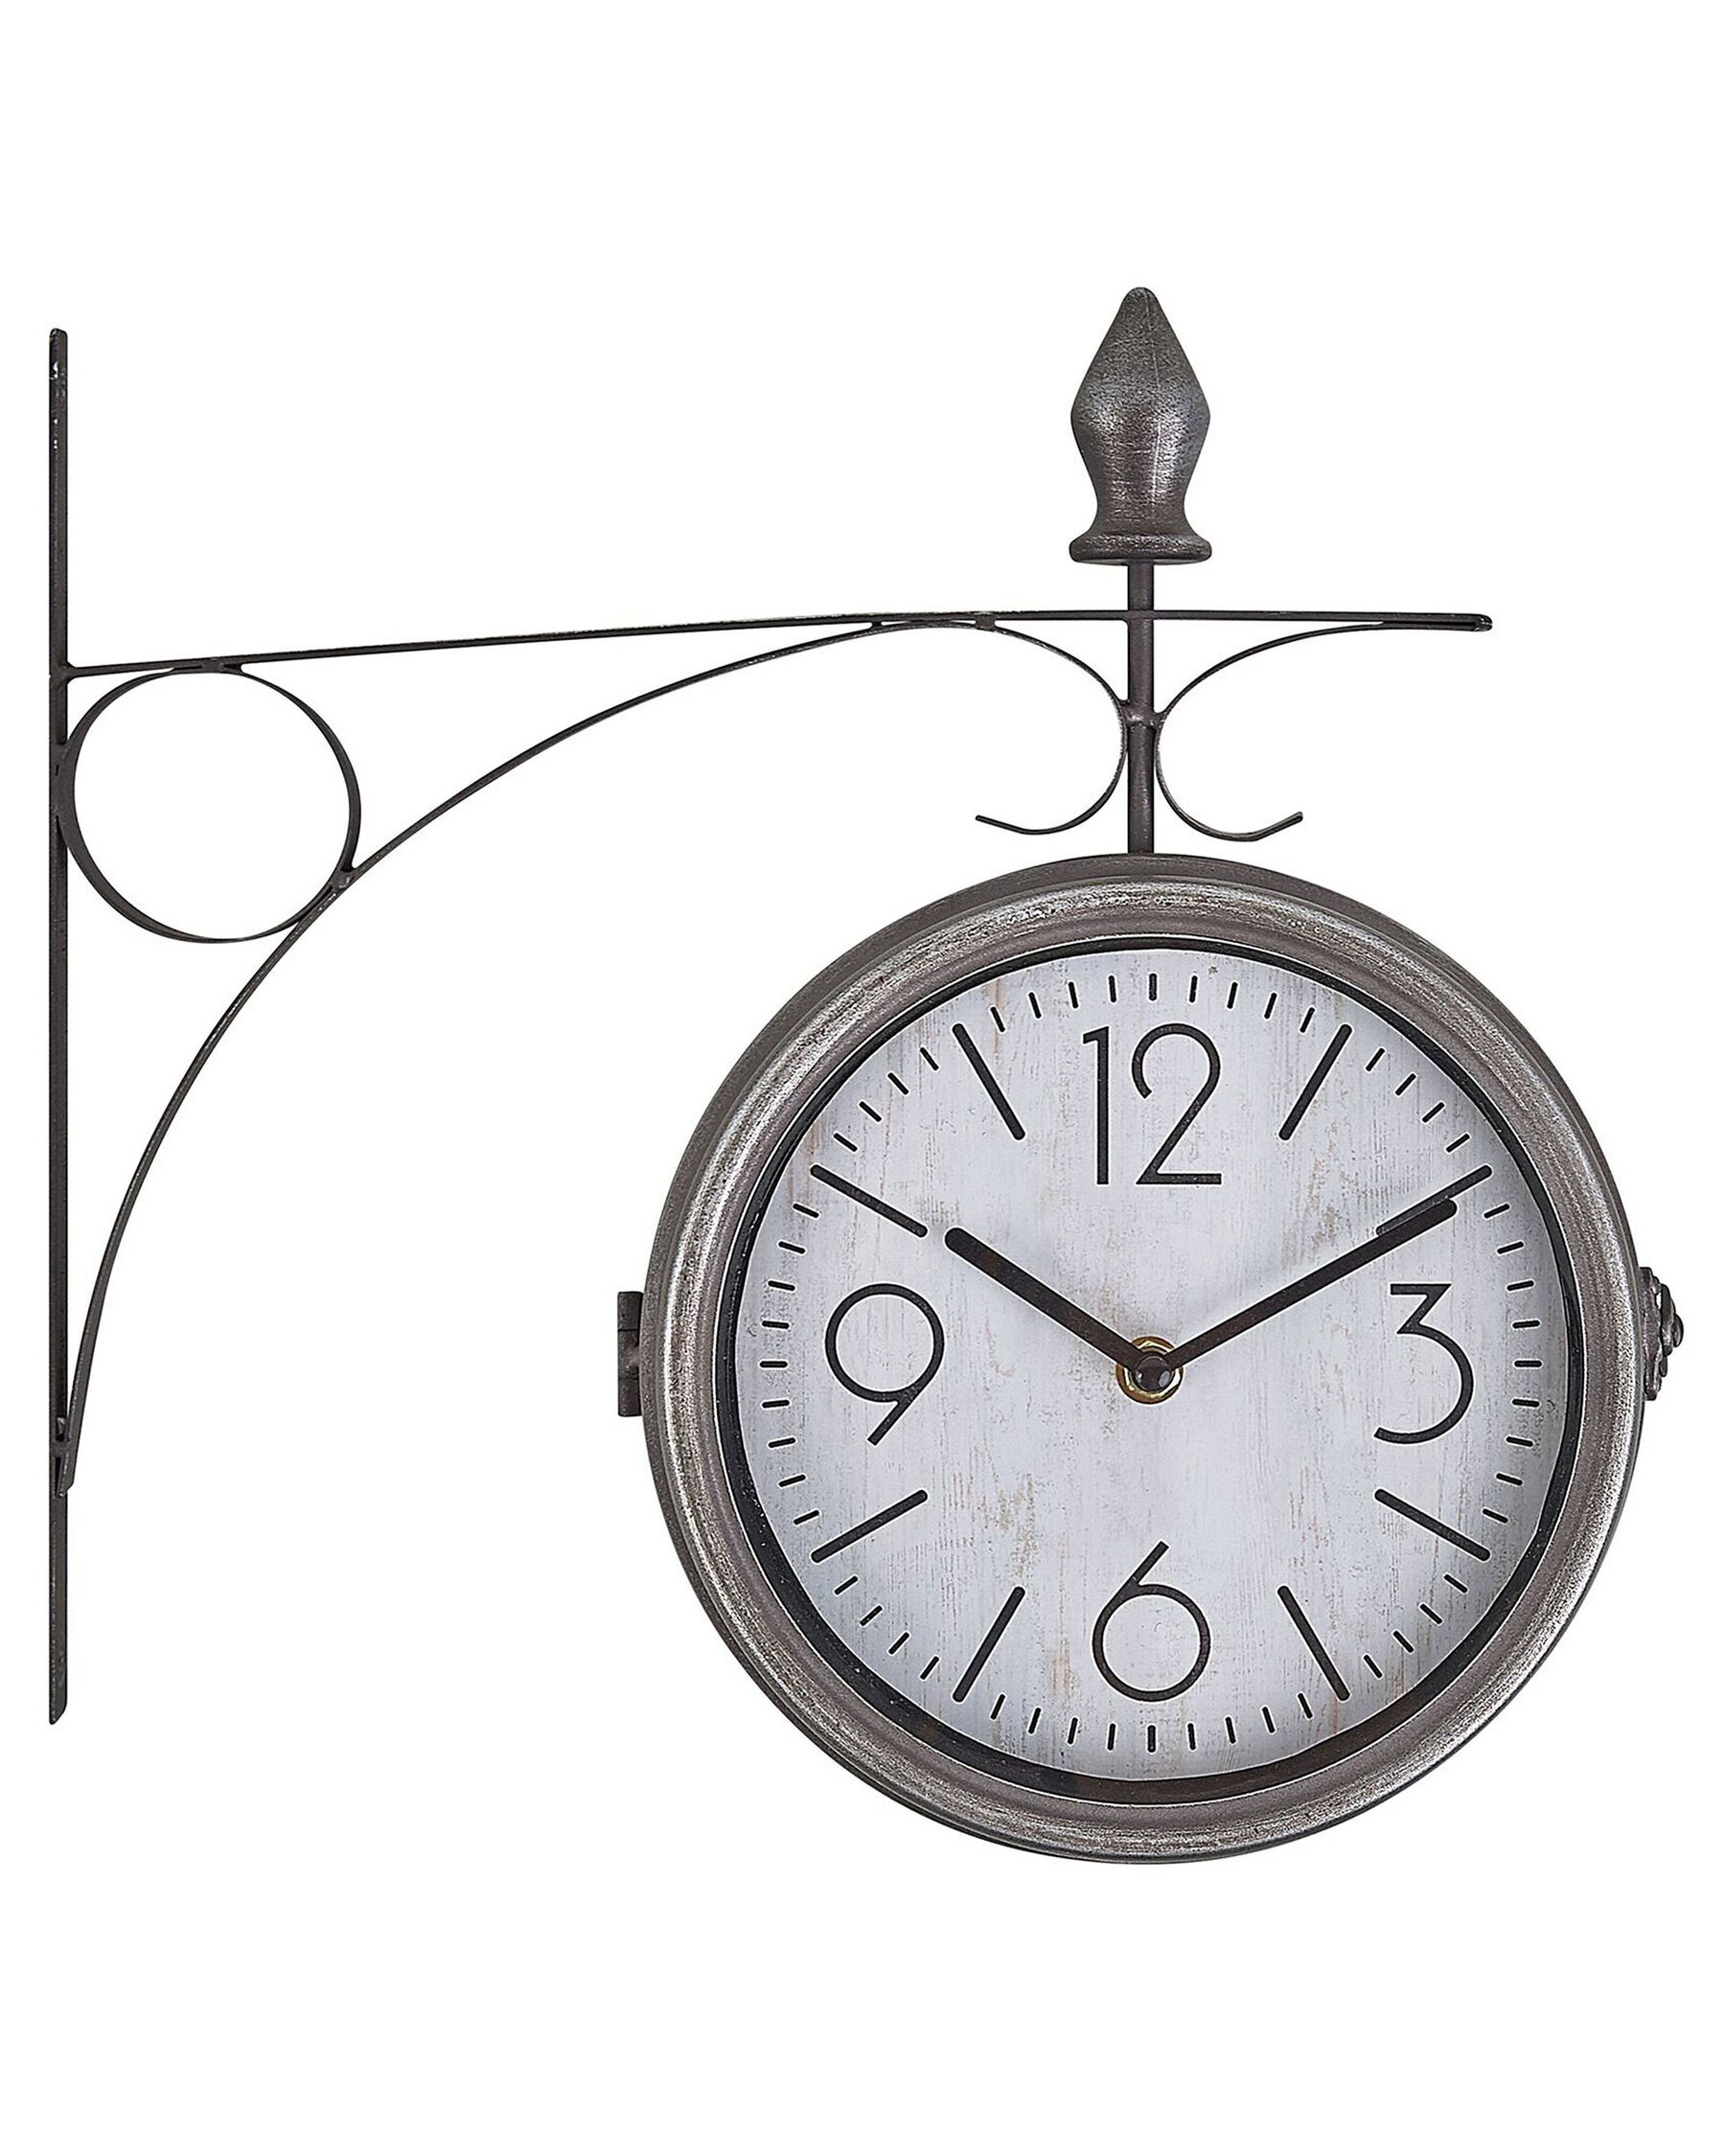 Iron Train Station Wall Clock ø 22 cm Silver and White ROMONT_784500